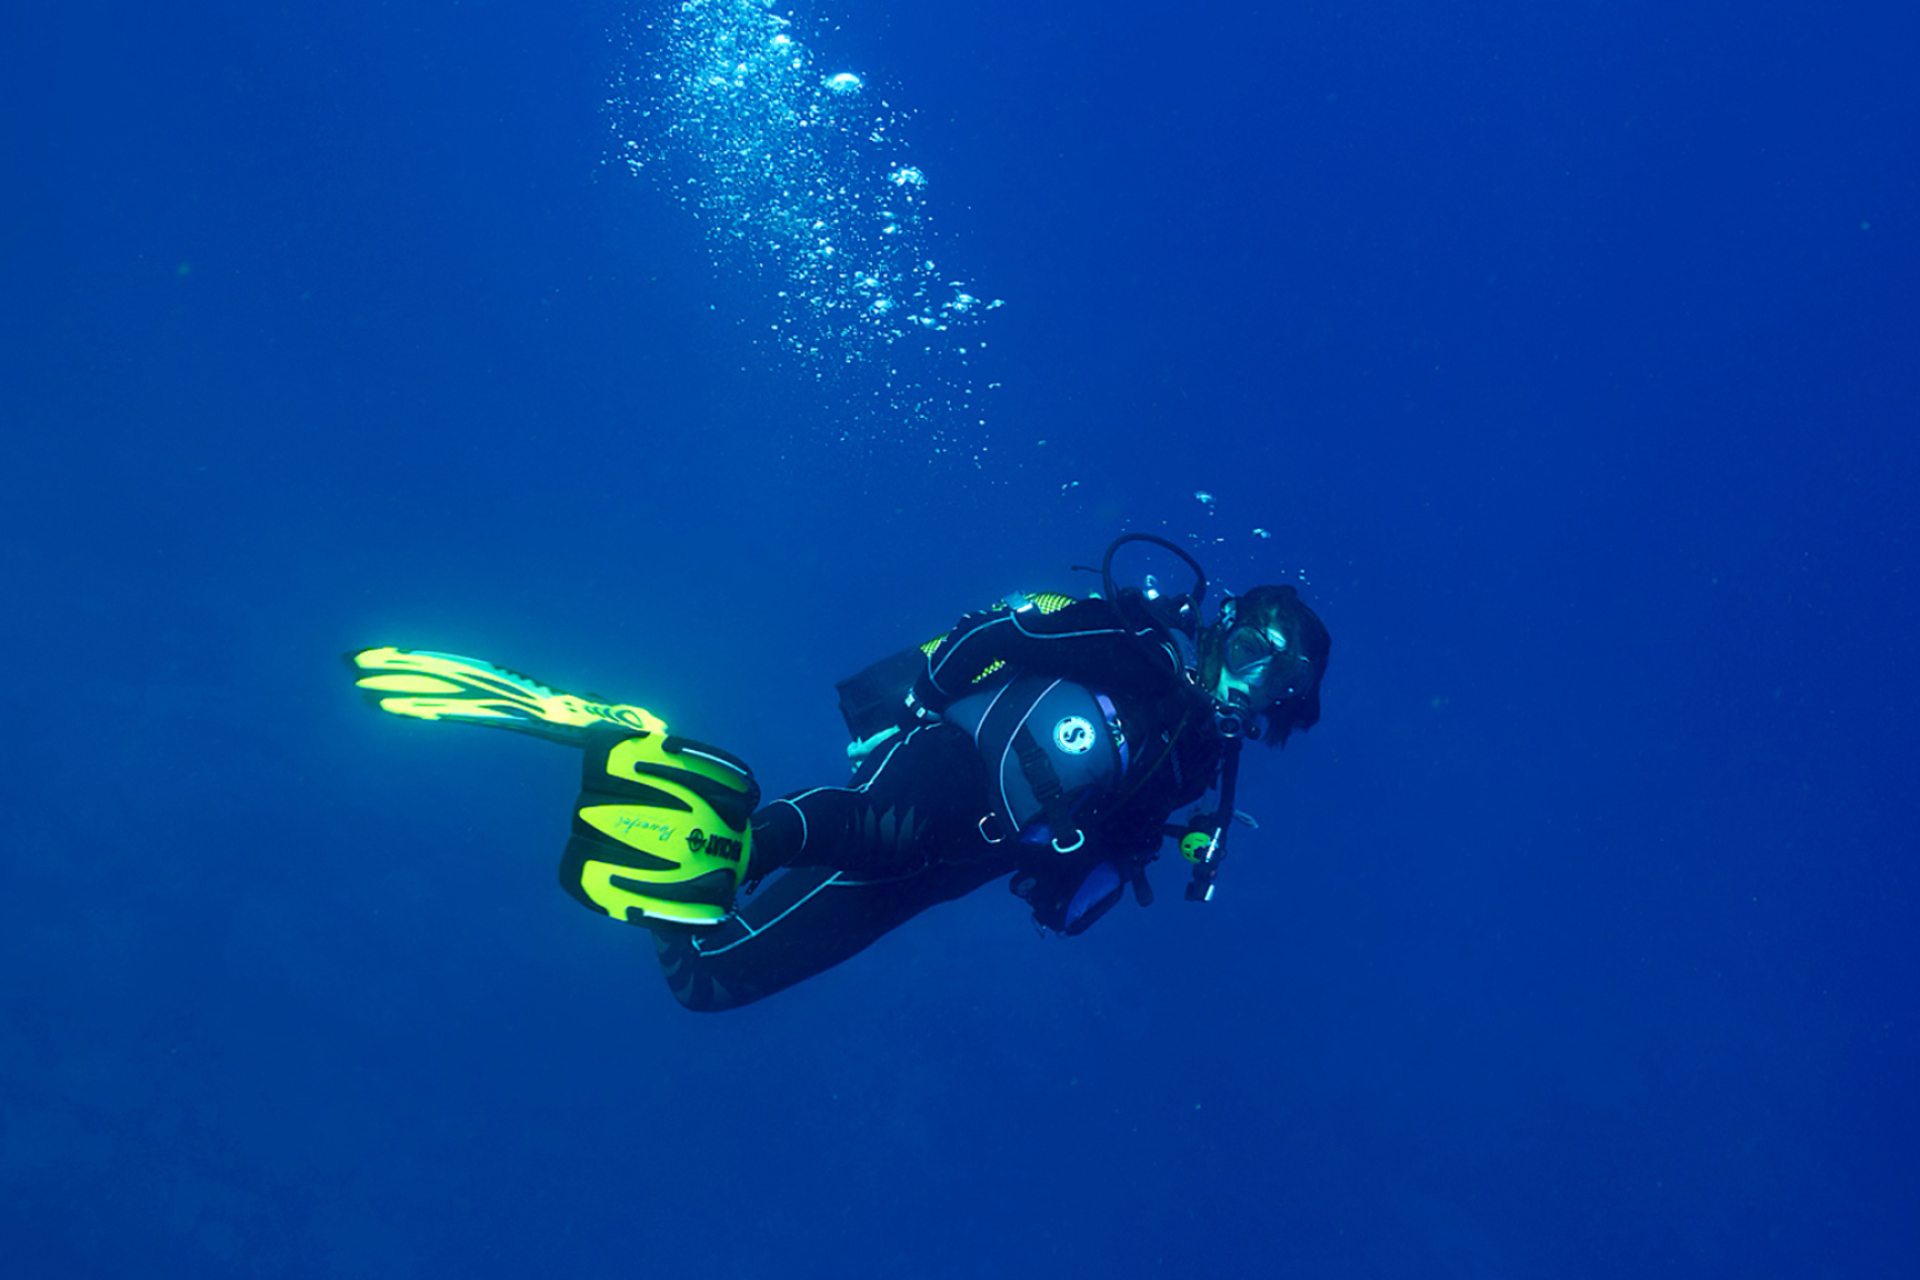 Diving: An extreme adventurous underwater activity, Swimming underwater for a long time. 1920x1280 HD Wallpaper.